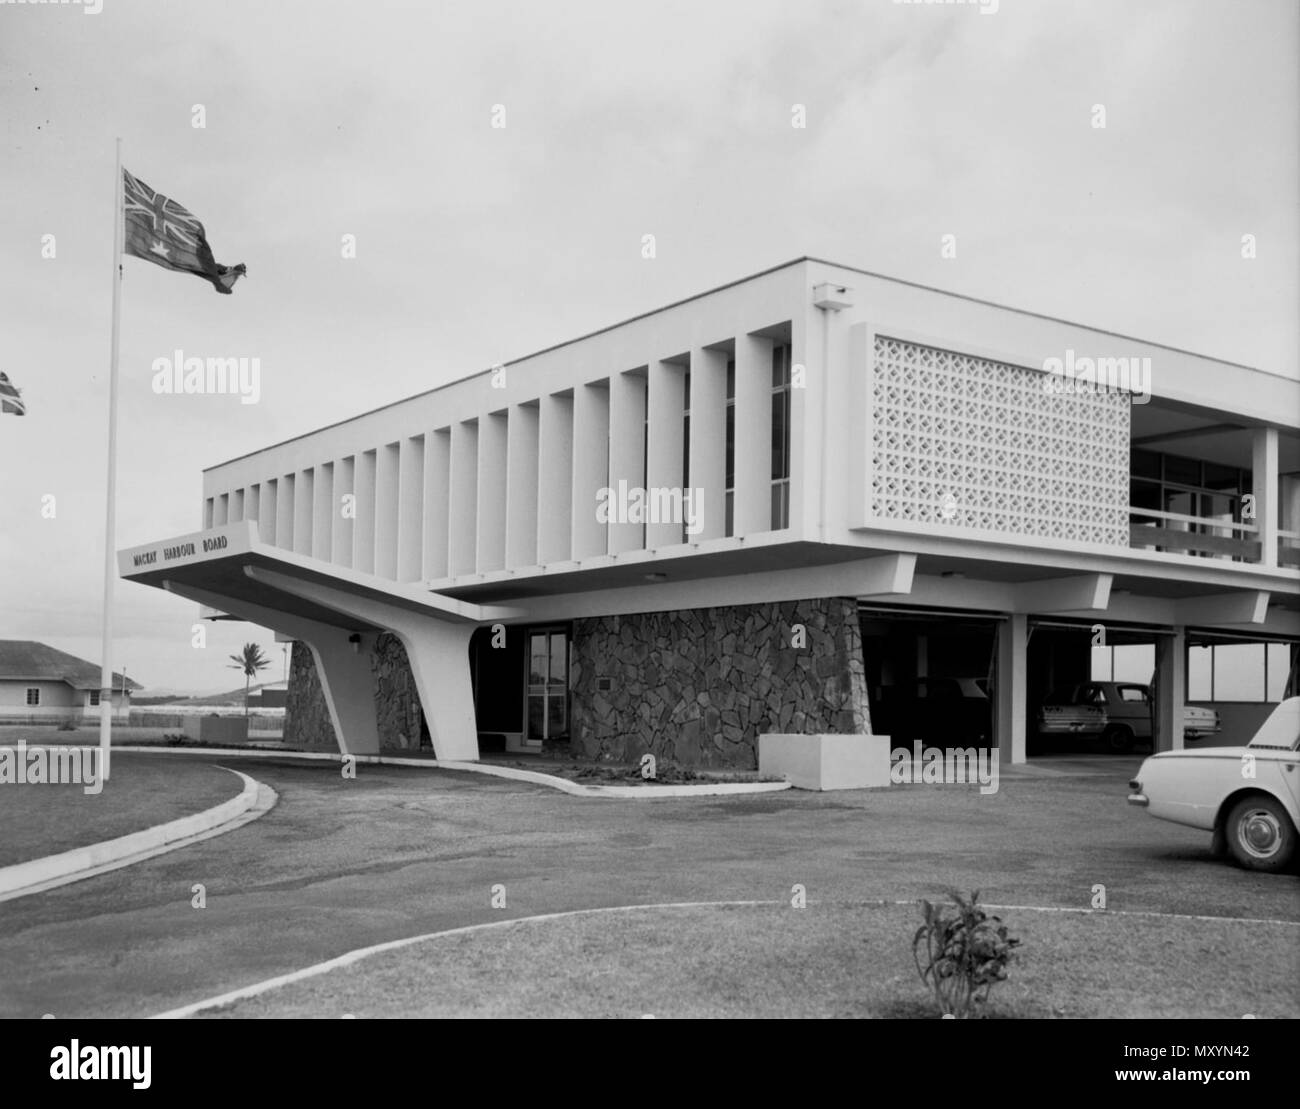 Mackay Harbour Board building, c 1964. The Mackay Harbour Board office building was designed by architect Russell Gibbins. It passed into the ownership of North Queensland Bulk Ports Corporation Limited in 2009. While it met some of the criteria to be listed on the Queensland Heritage Register, due to being surrounded by bulk petrol, diesel and sulphuric acid tanks the building could no longer be used and a decision was taken in 2011 that it would not be heritage listed. Stock Photo